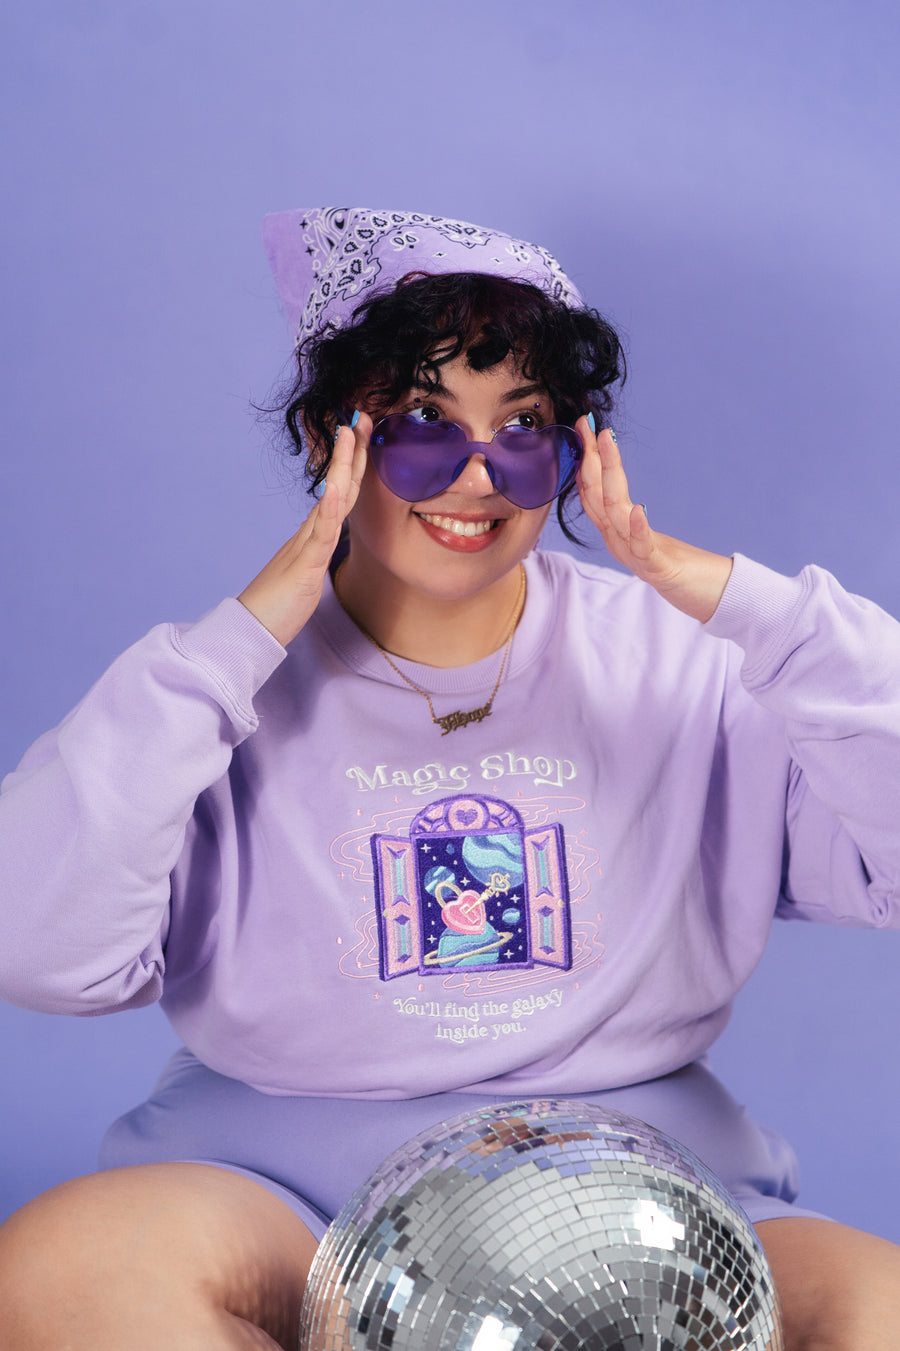 Model infront of purple wall wearing a purple crewneck sweatshirt inspired by the BTS song Magic Shop.